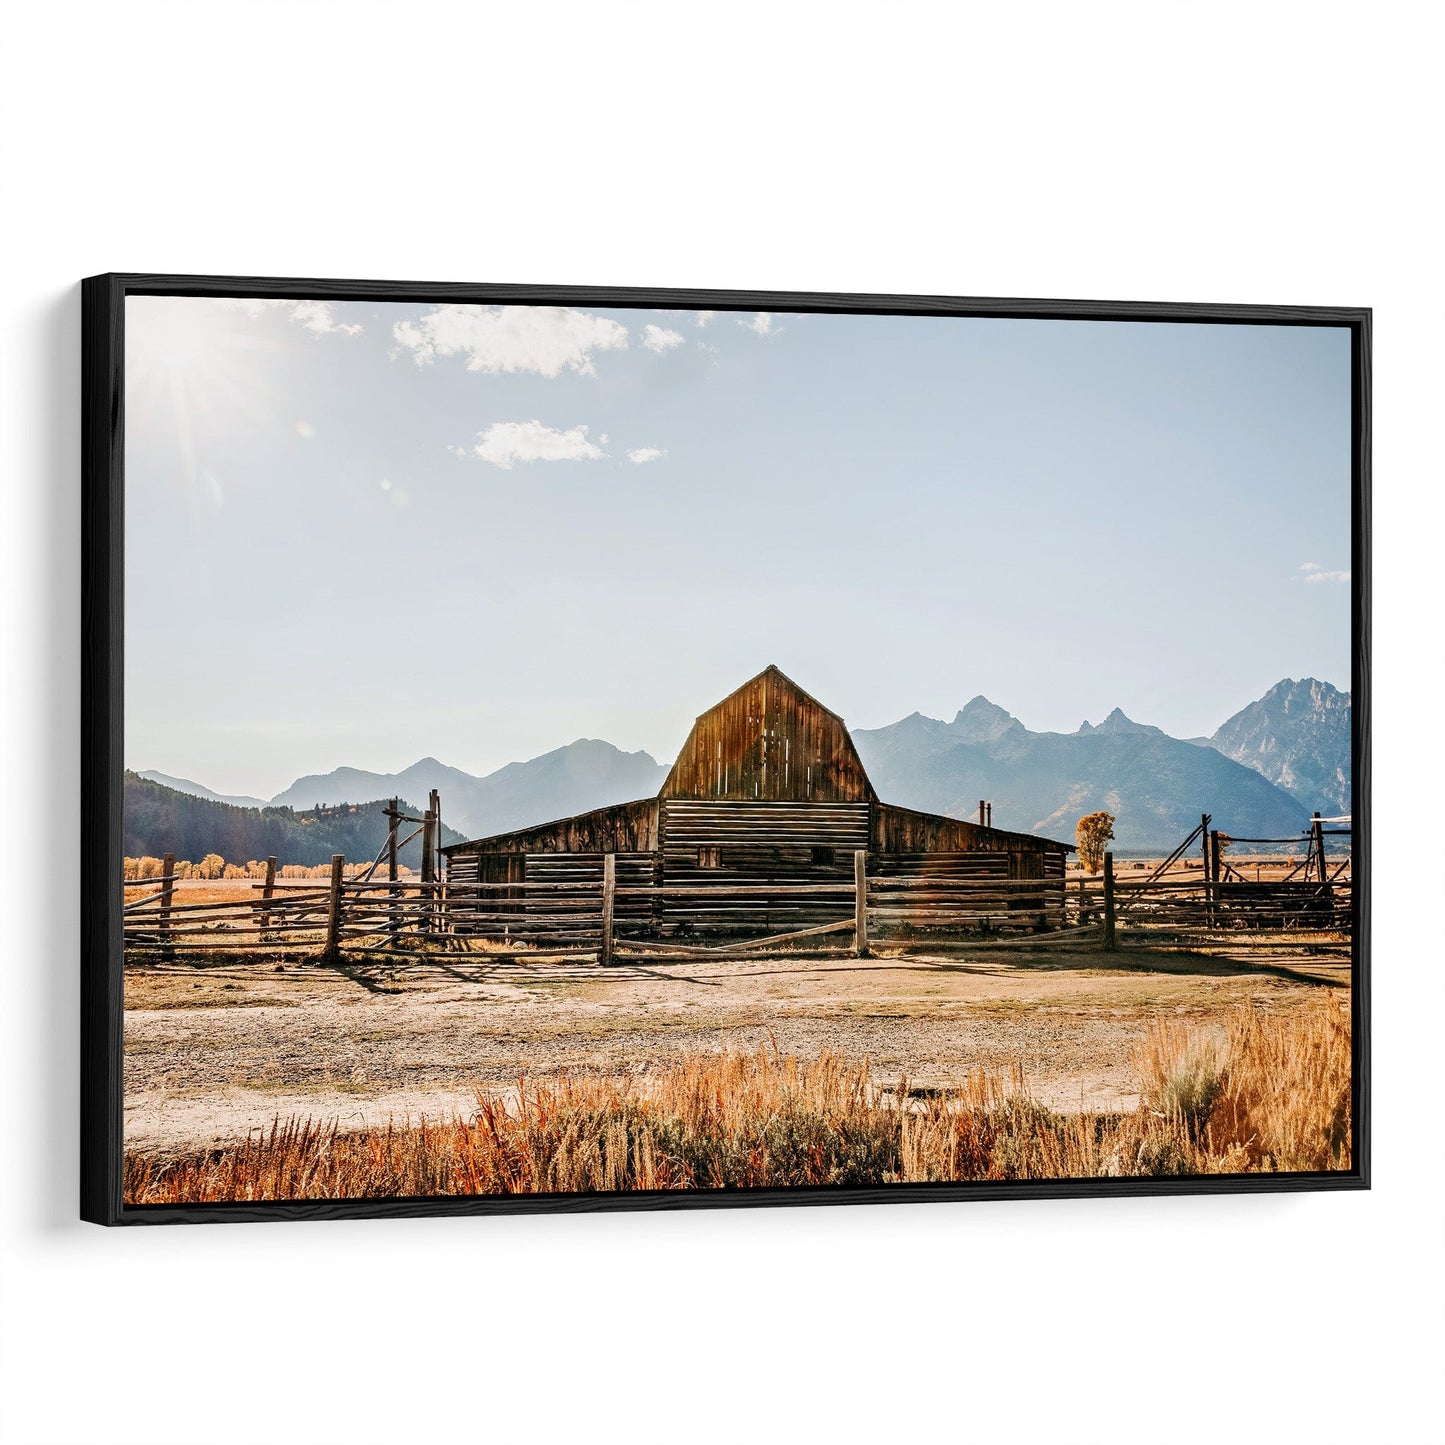 Wyoming Wall Art - Moulton Barn in Grand Tetons Canvas-Black Frame / 12 x 18 Inches Wall Art Teri James Photography